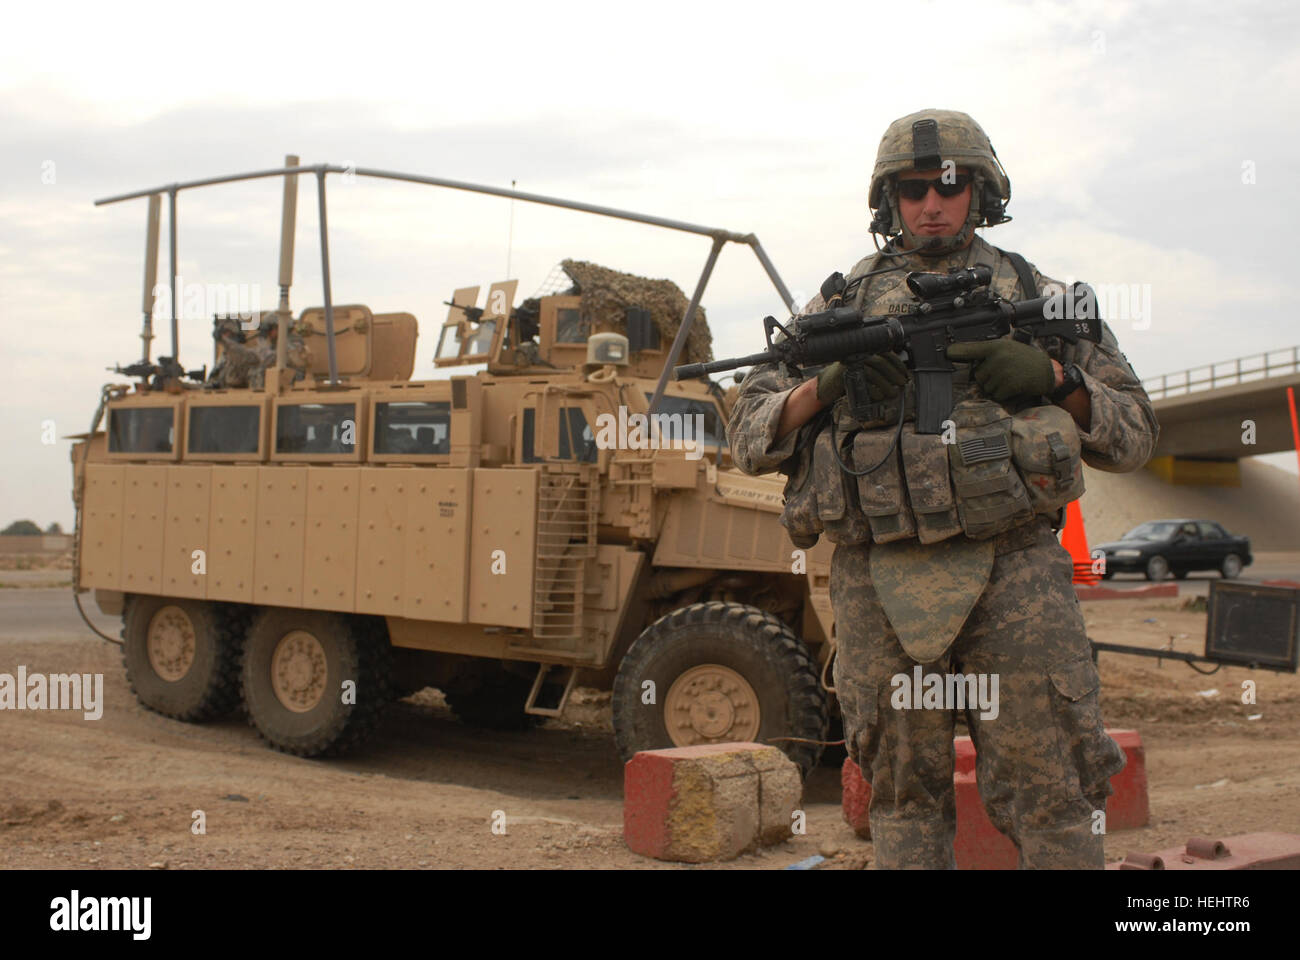 U.S Army 1st Lt. Andrew Dacey, attached to the 2nd Brigade, 1st Infantry Division, stands in front of an ambush-protected vehicle in Abu Ghraib, Iraq, March 31. Flickr - The U.S. Army - Ambush-protected vehicle Stock Photo